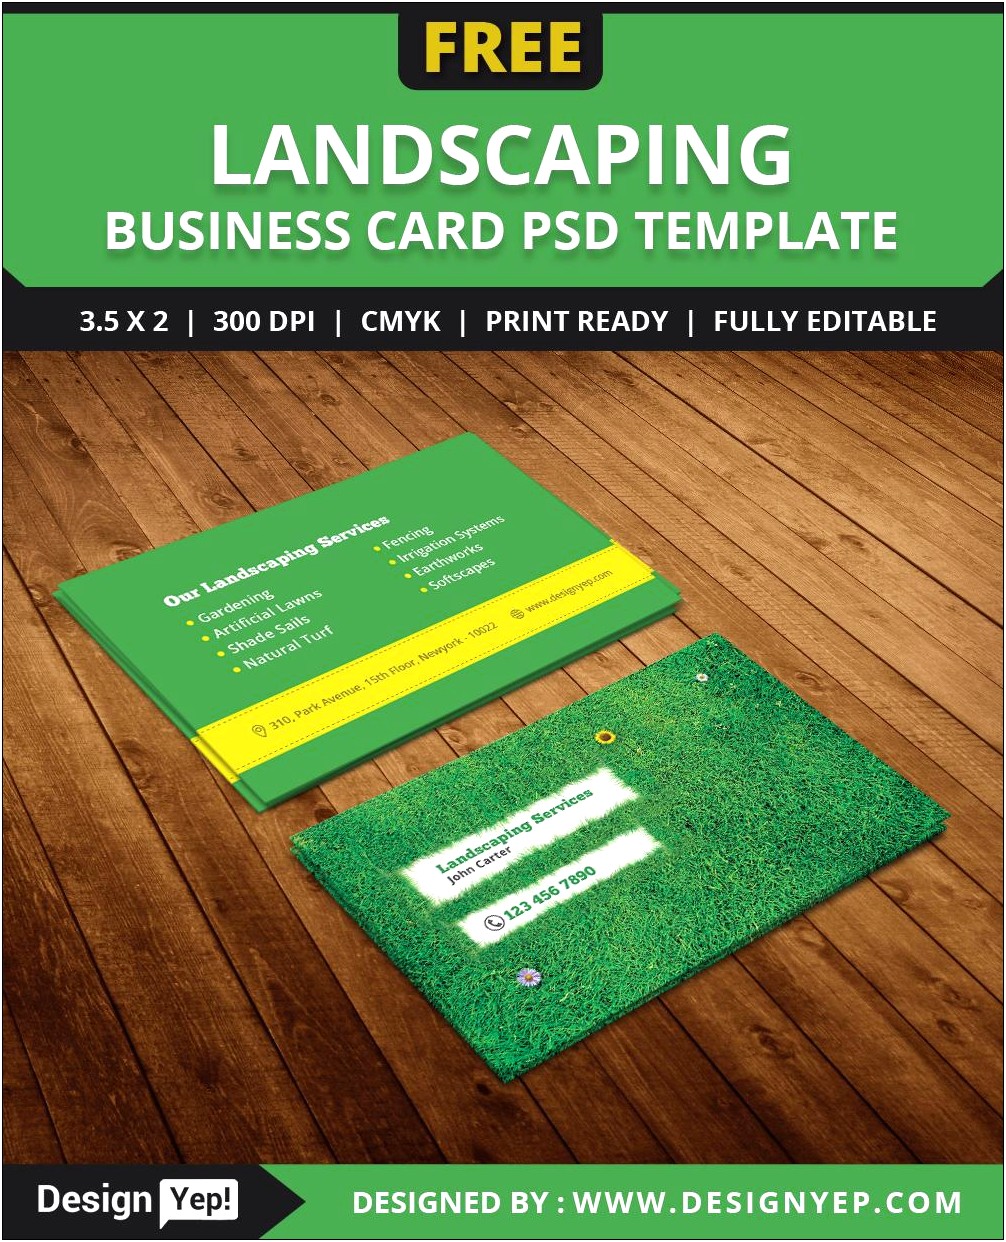 Free Lawn Care Business Card Psd Template